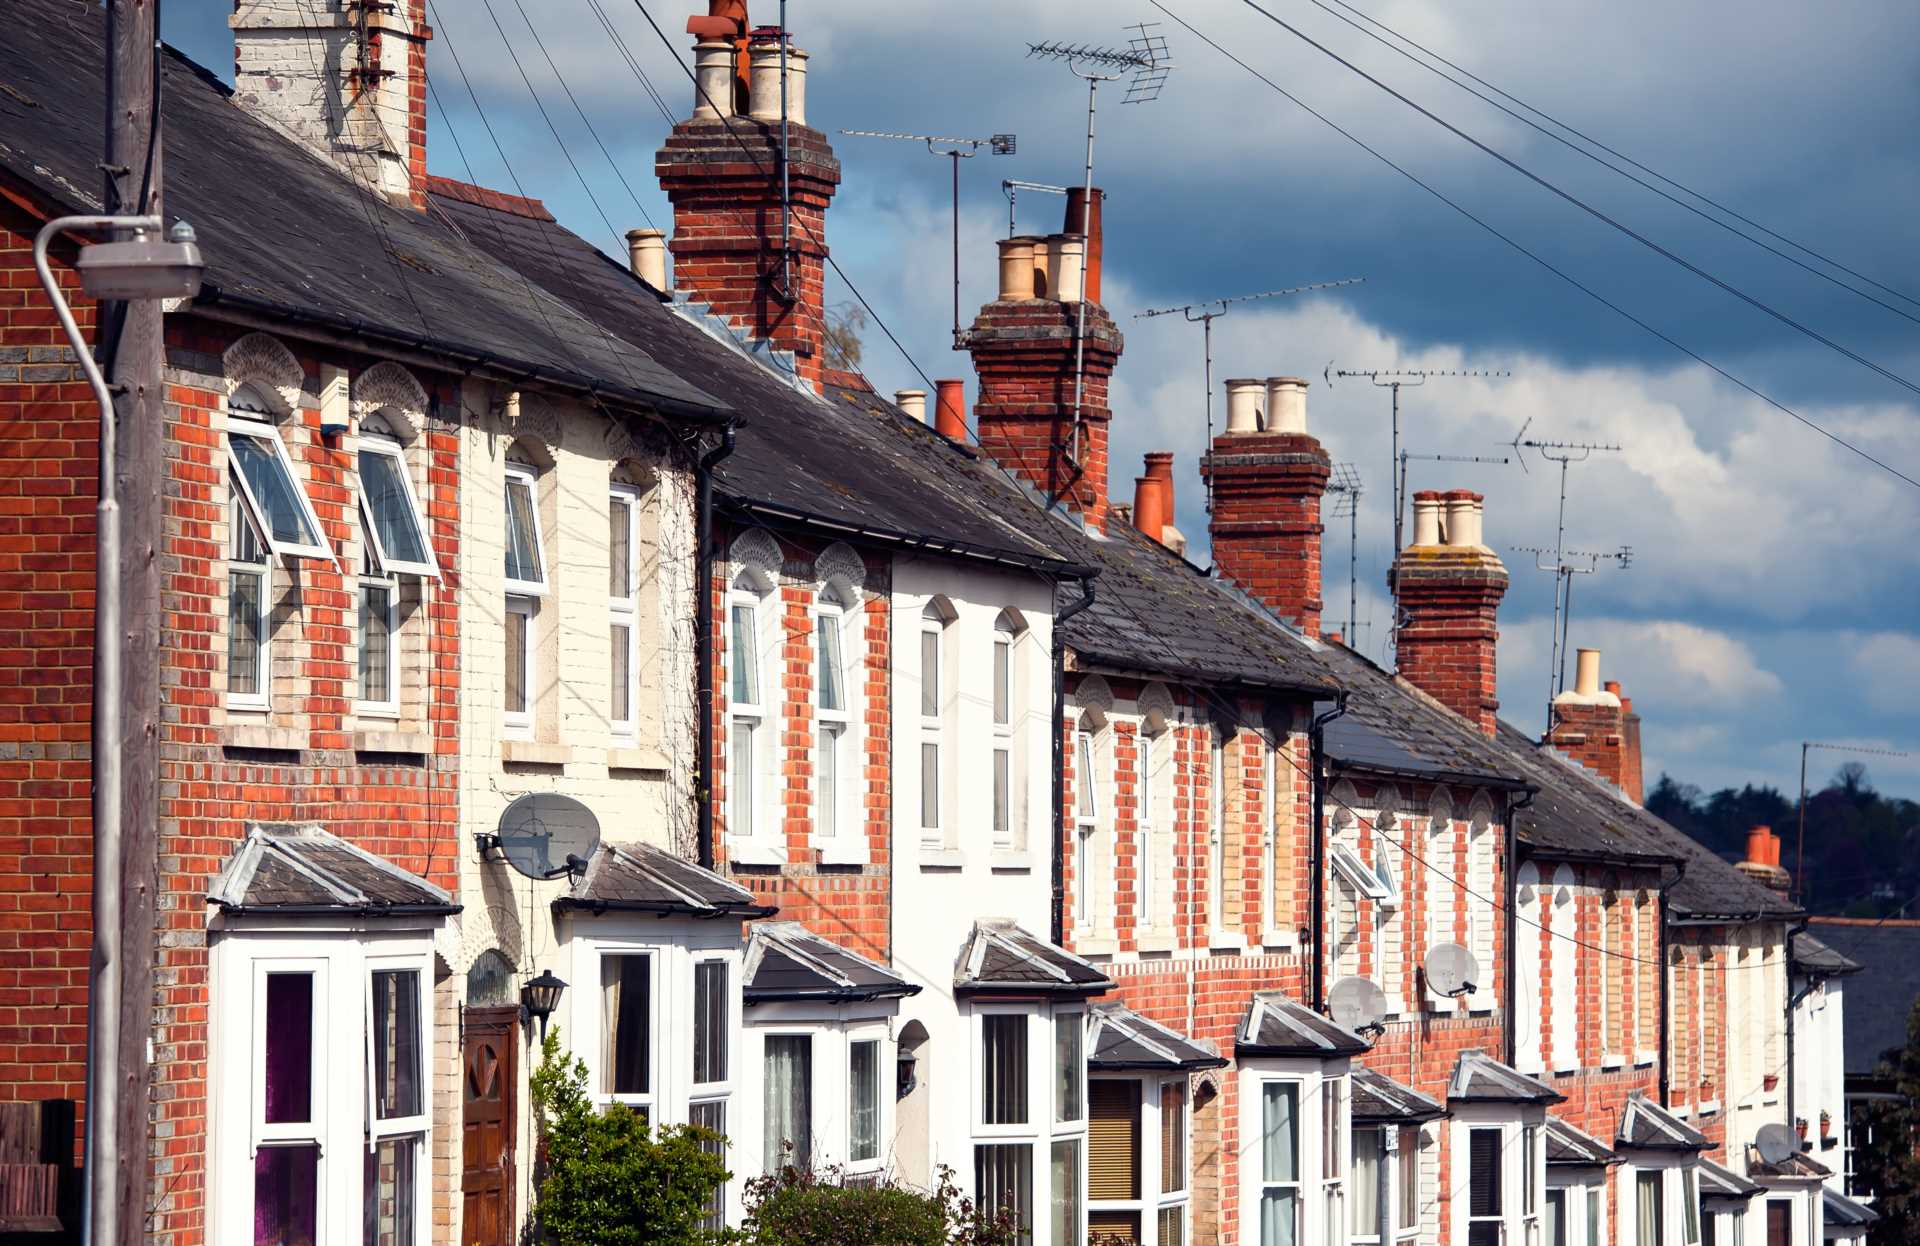 Is Council Tax Banding for HMO Properties Outdated?